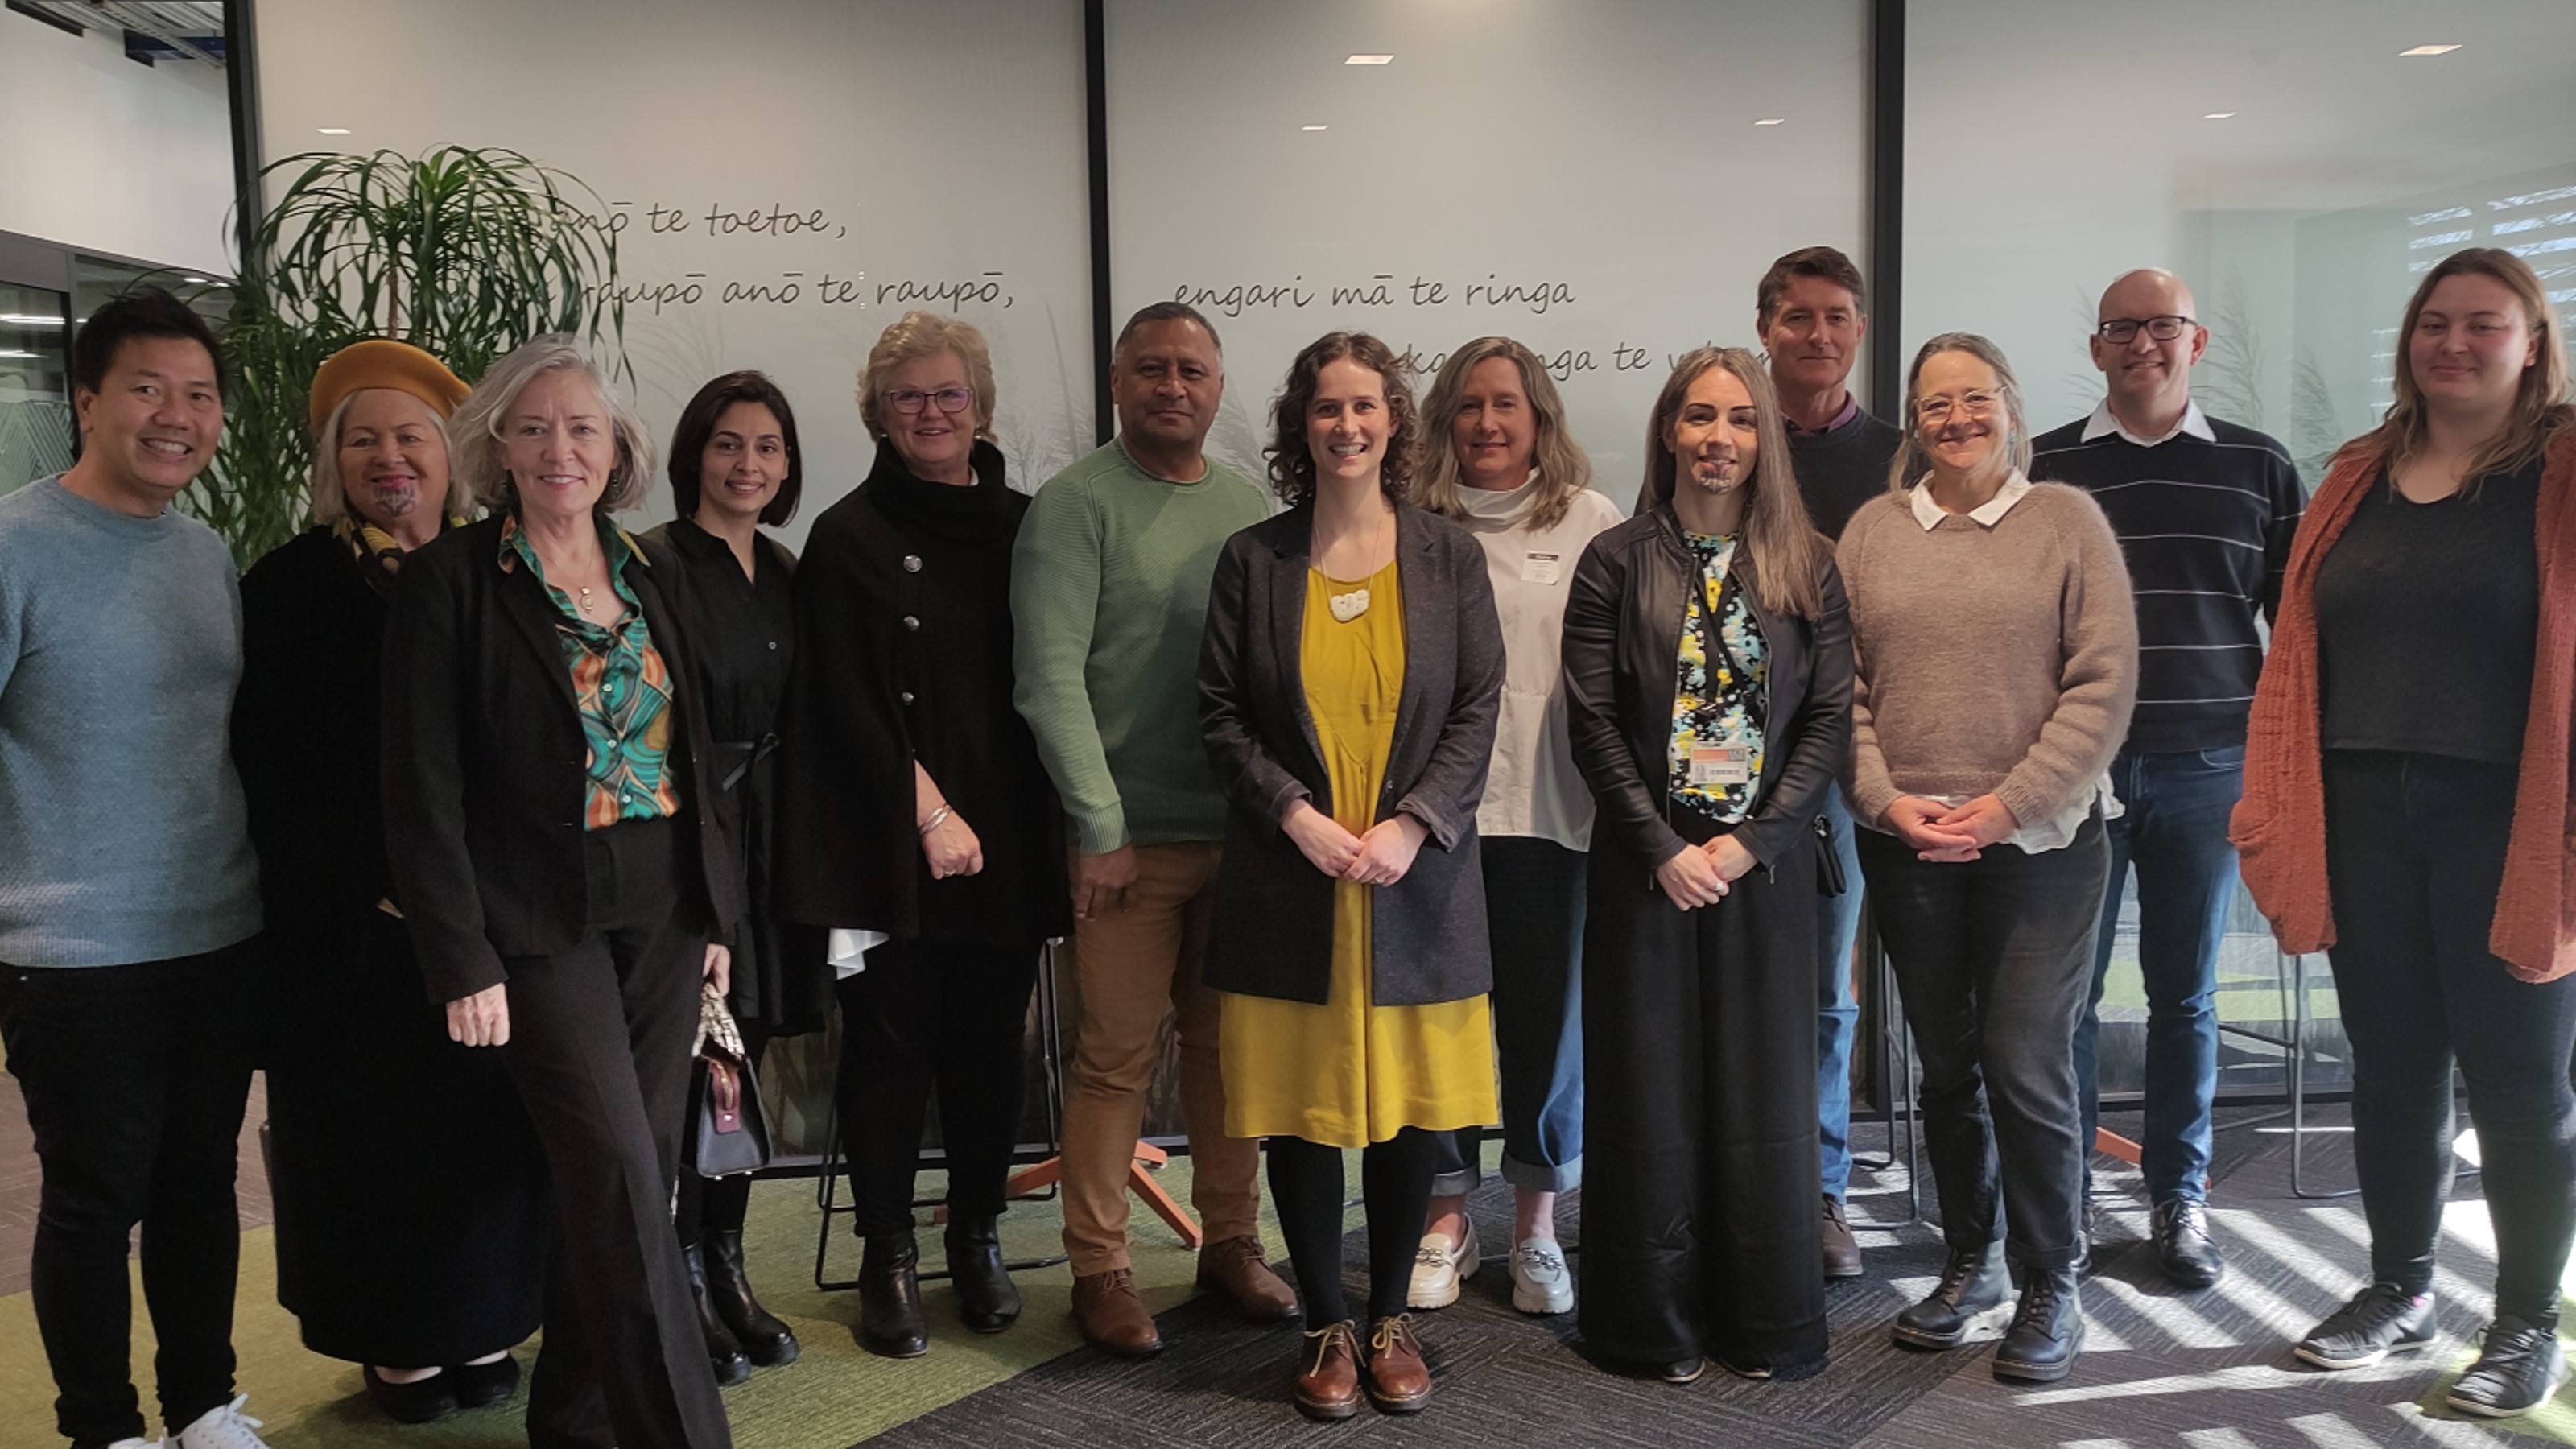 The research team who are exploring the early experiences of the assisted dying service in Aotearoa posing for a photo together.